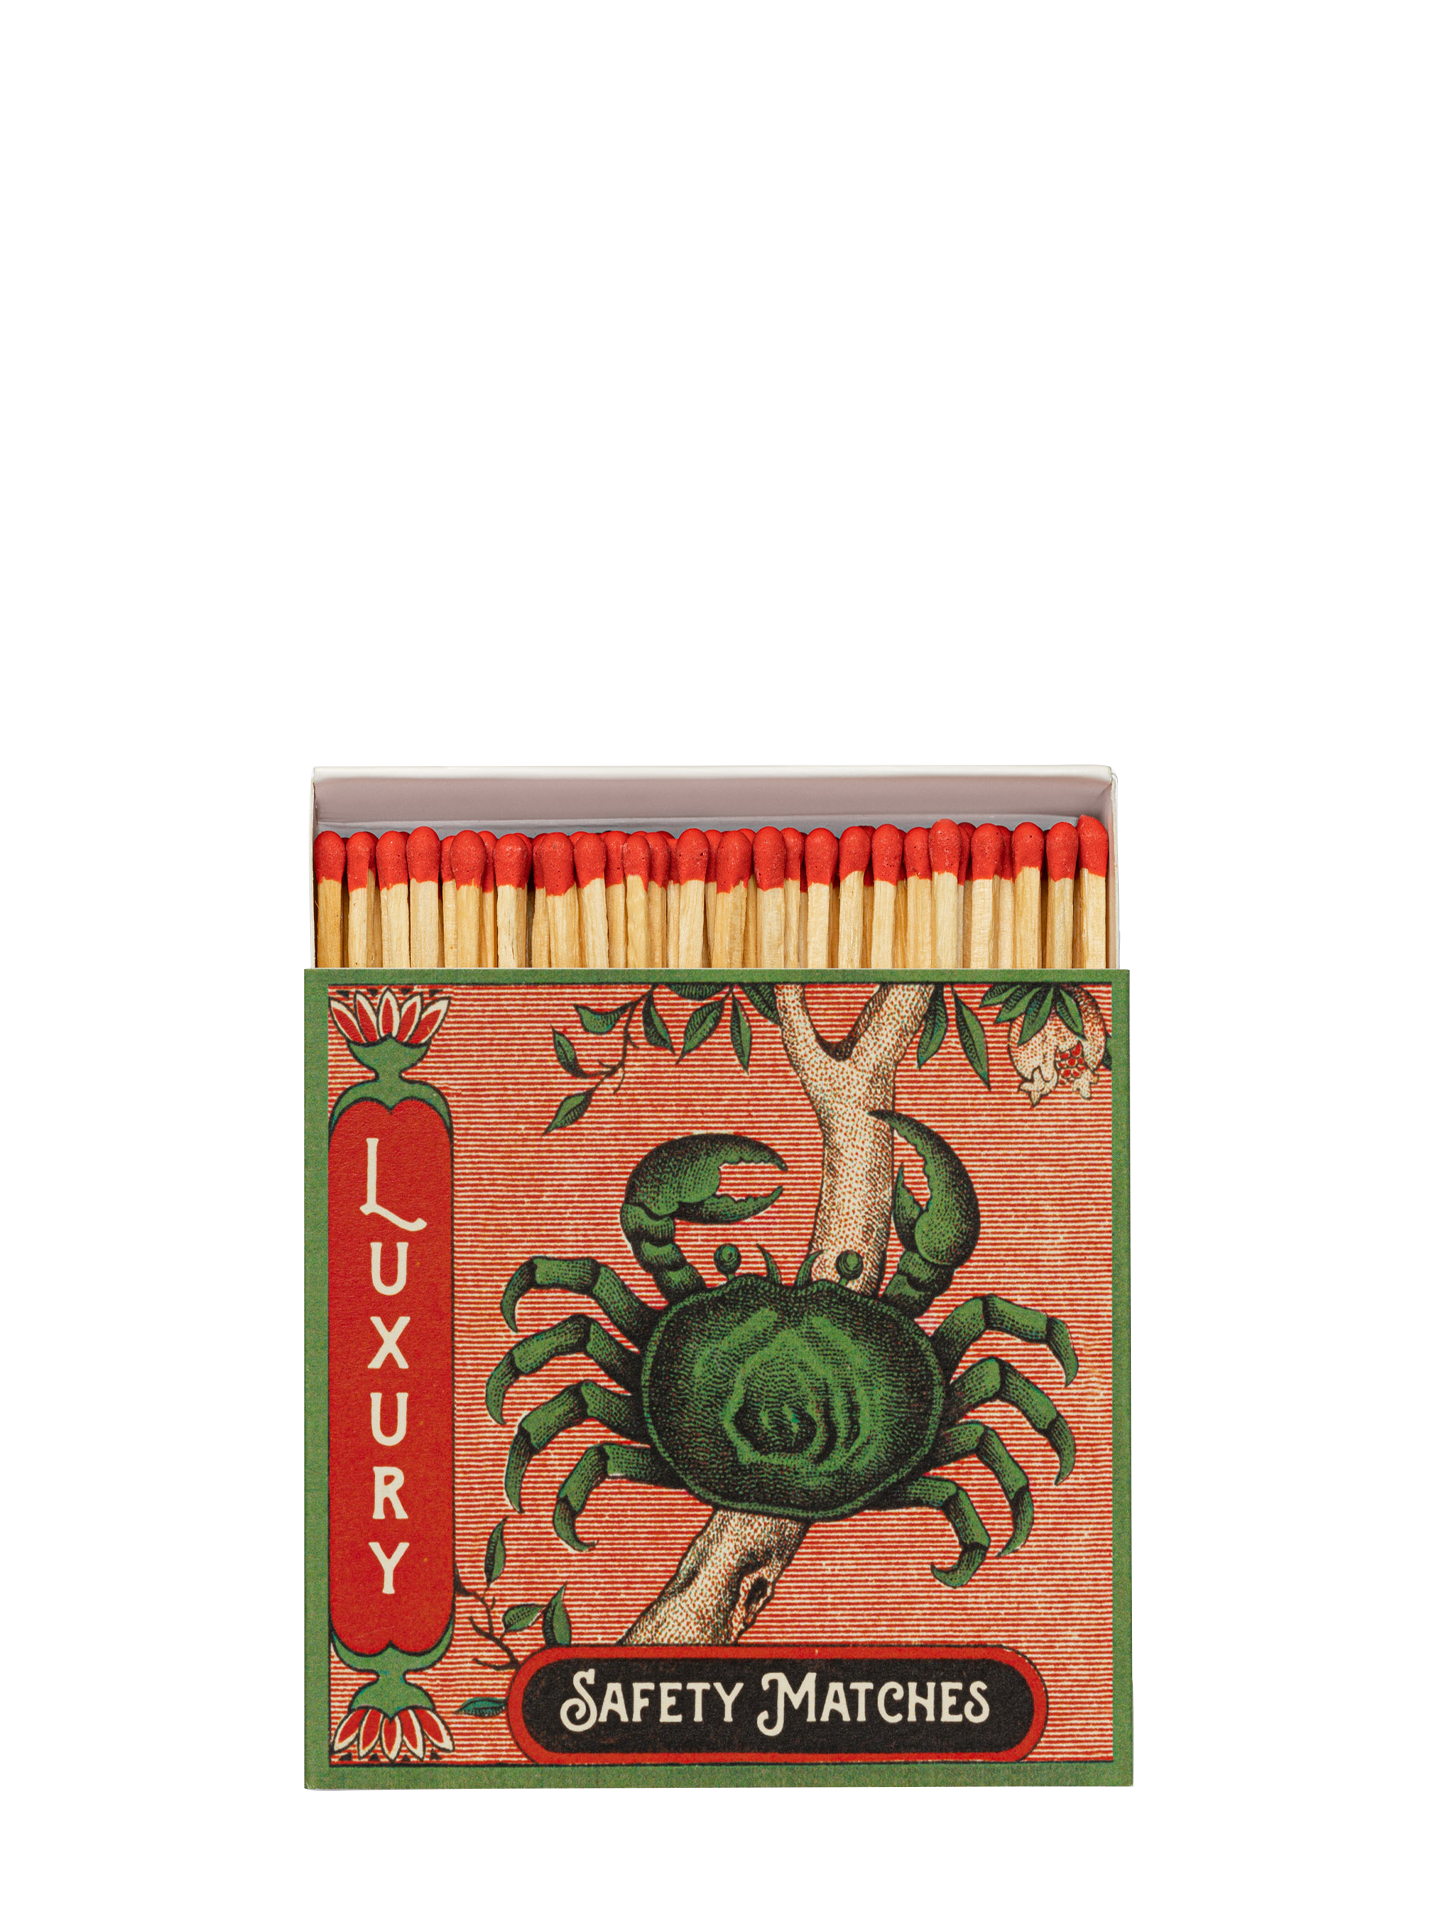 The Crab Safety Matches